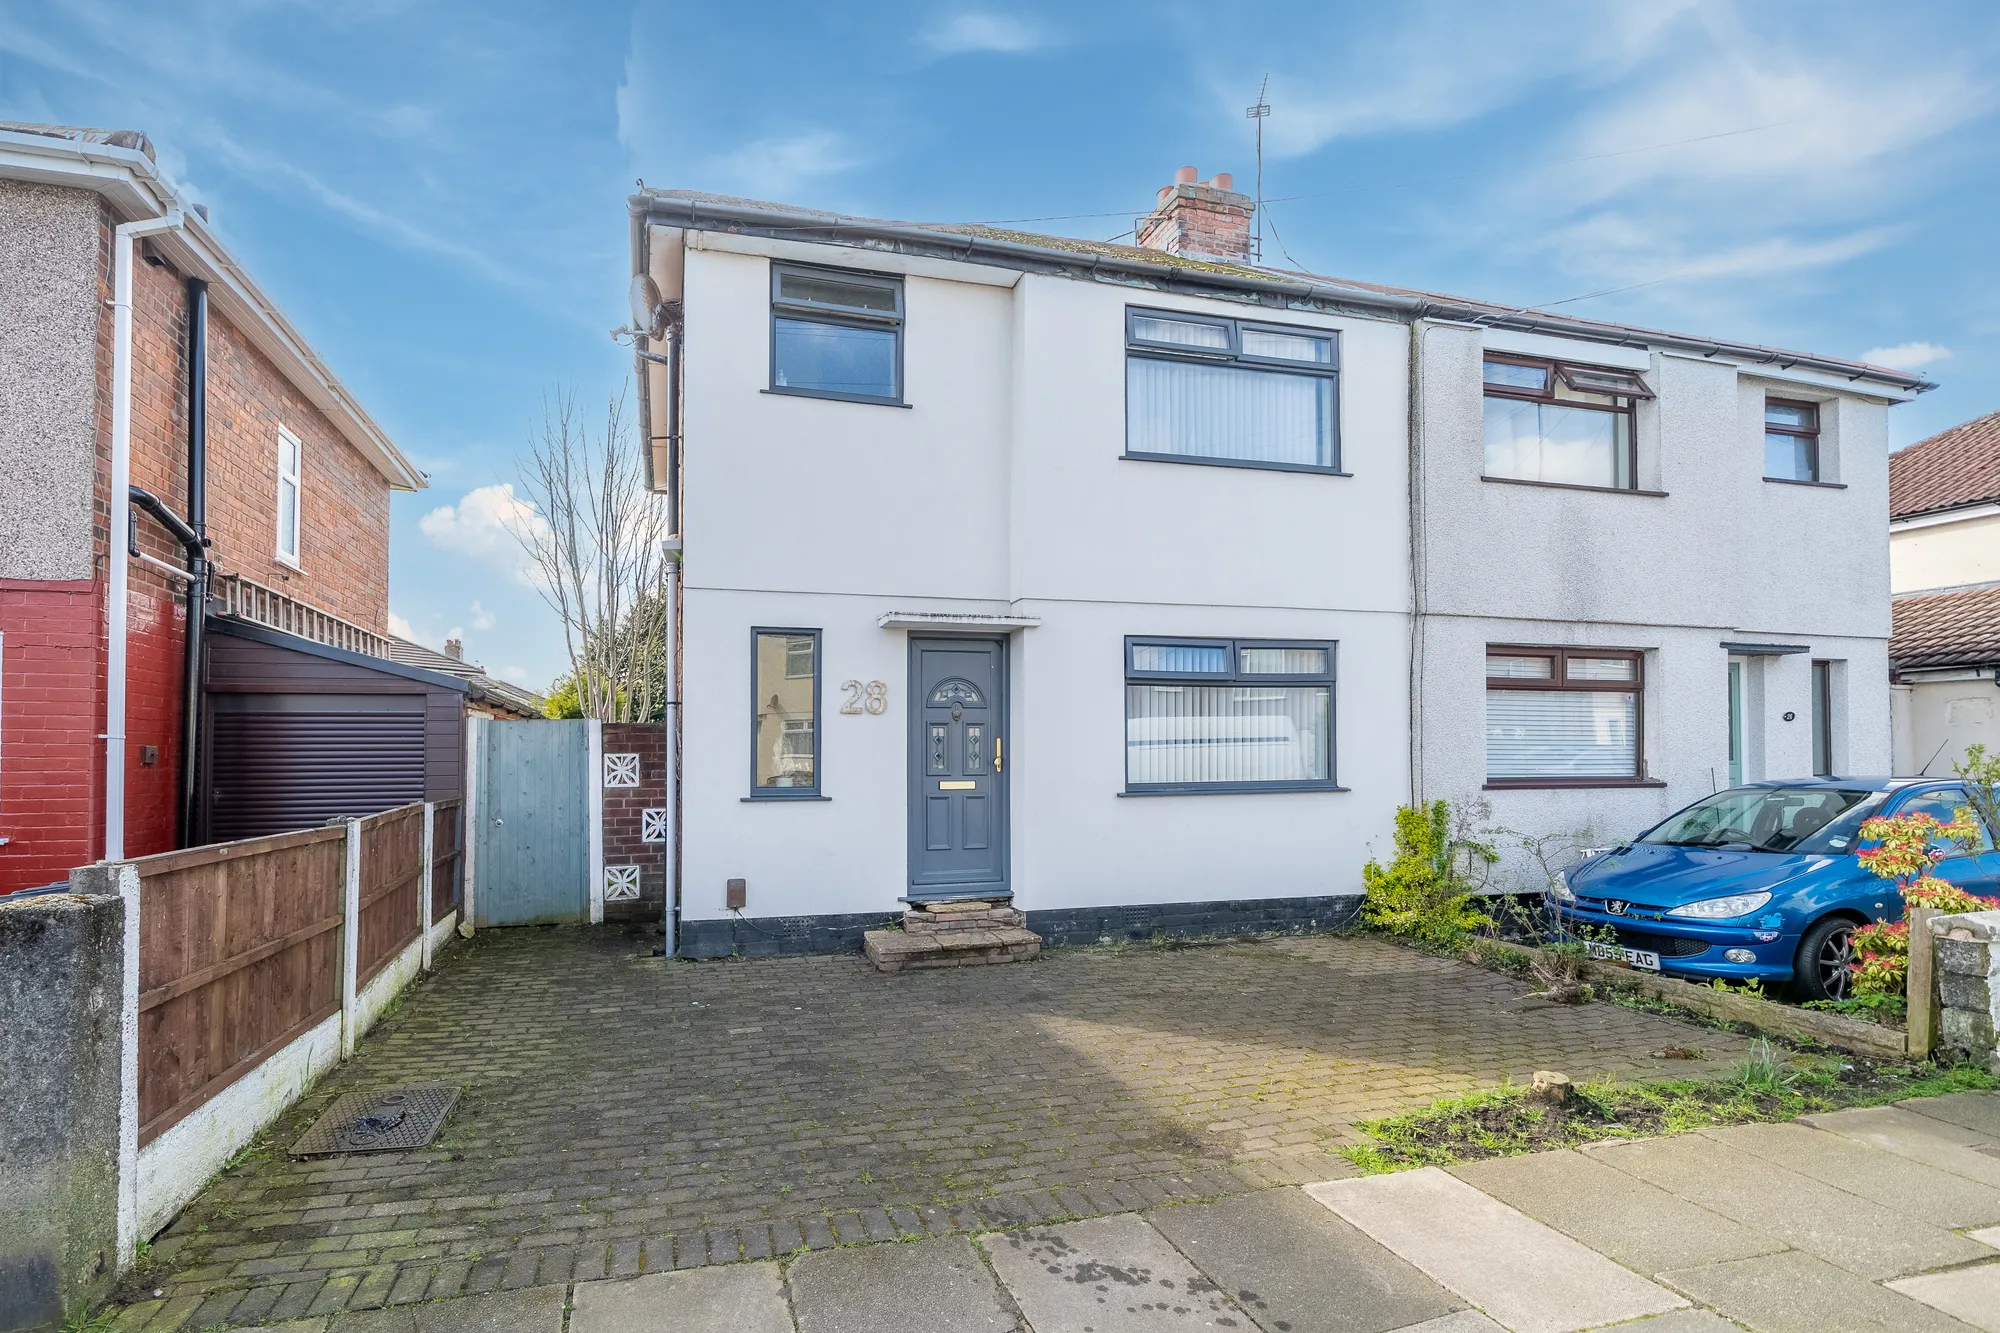 Inviting 3-bed semi-detached home in vibrant Maghull. Expansive open-plan layout, separate lounge, and a huge rear garden for privacy and tranquillity. Large driveway, perfect for relaxing and entertaining. Enjoy the tranquil lifestyle of this thoughtfully designed sanctuary.